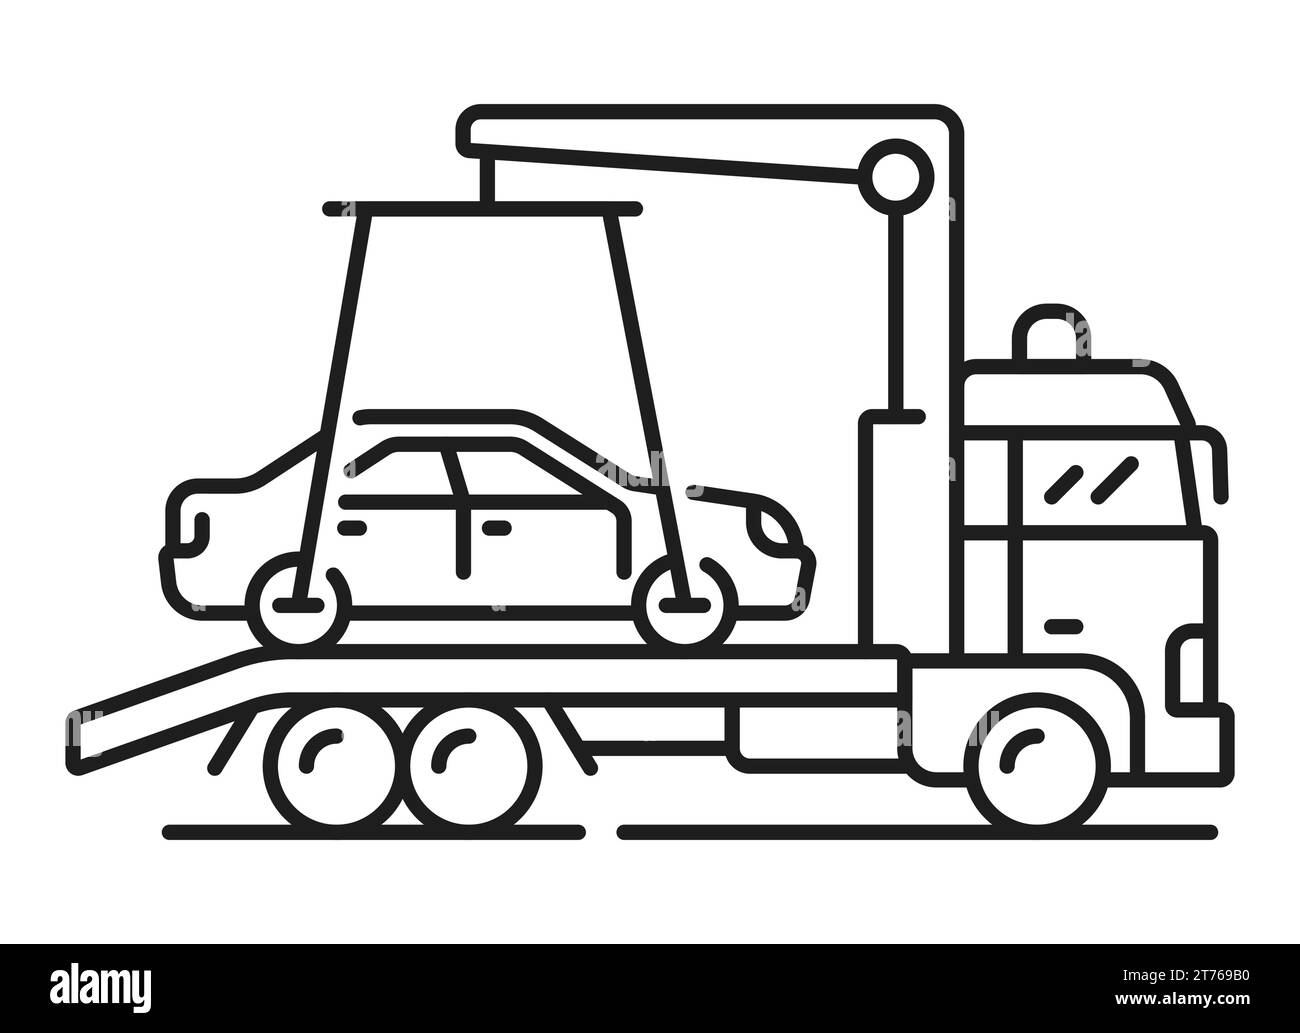 Car towing line icon, parking and automatic garage service vector linear sign. Unauthorized parking warning symbol of tow truck for car park lot or public garage restricted information sign Stock Vector